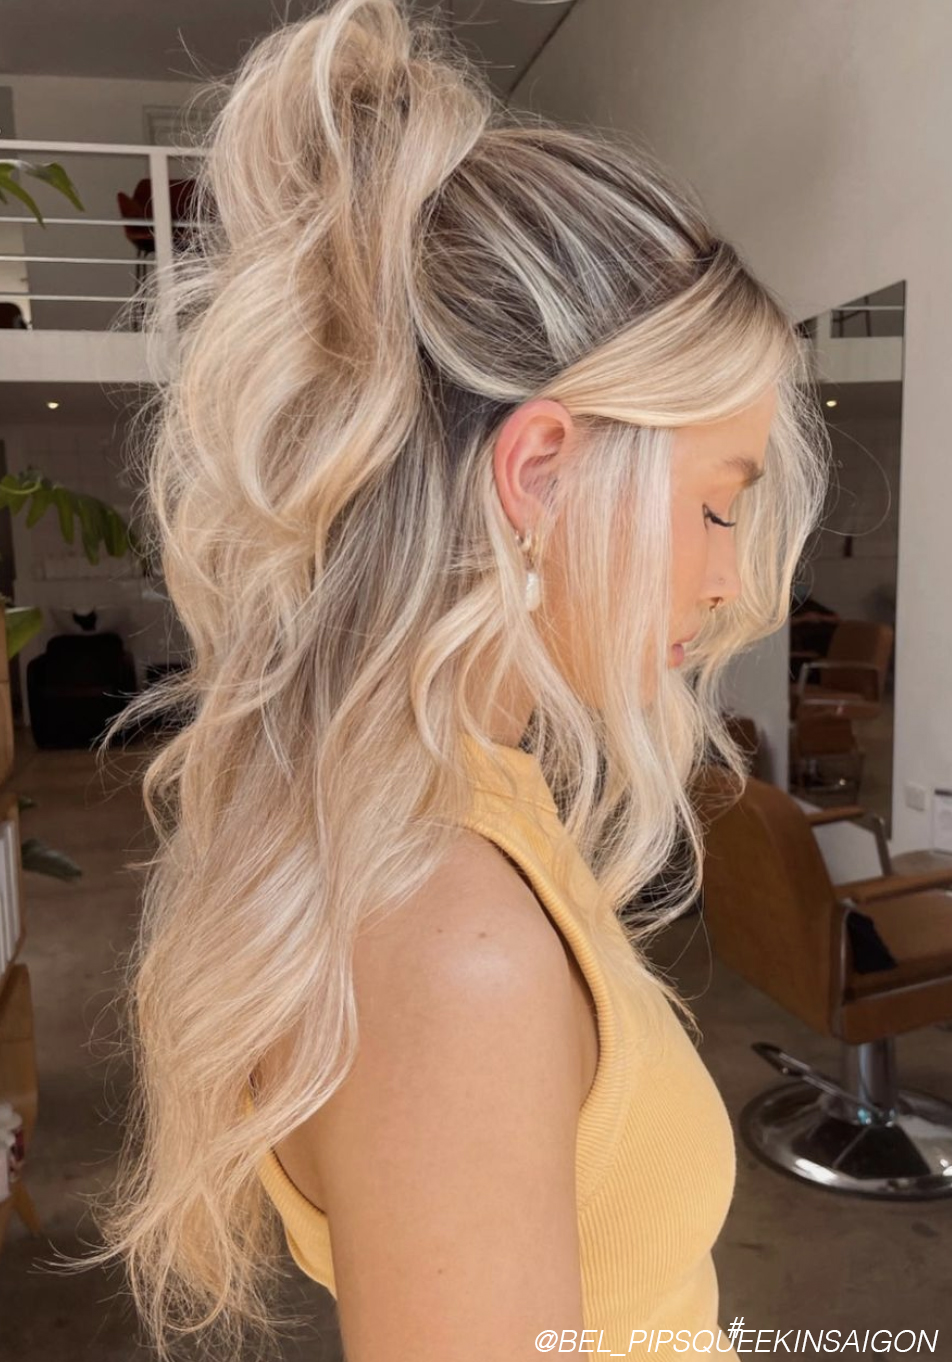 6 Tips To Easily Extend Your Style - Bangstyle - House of Hair Inspiration